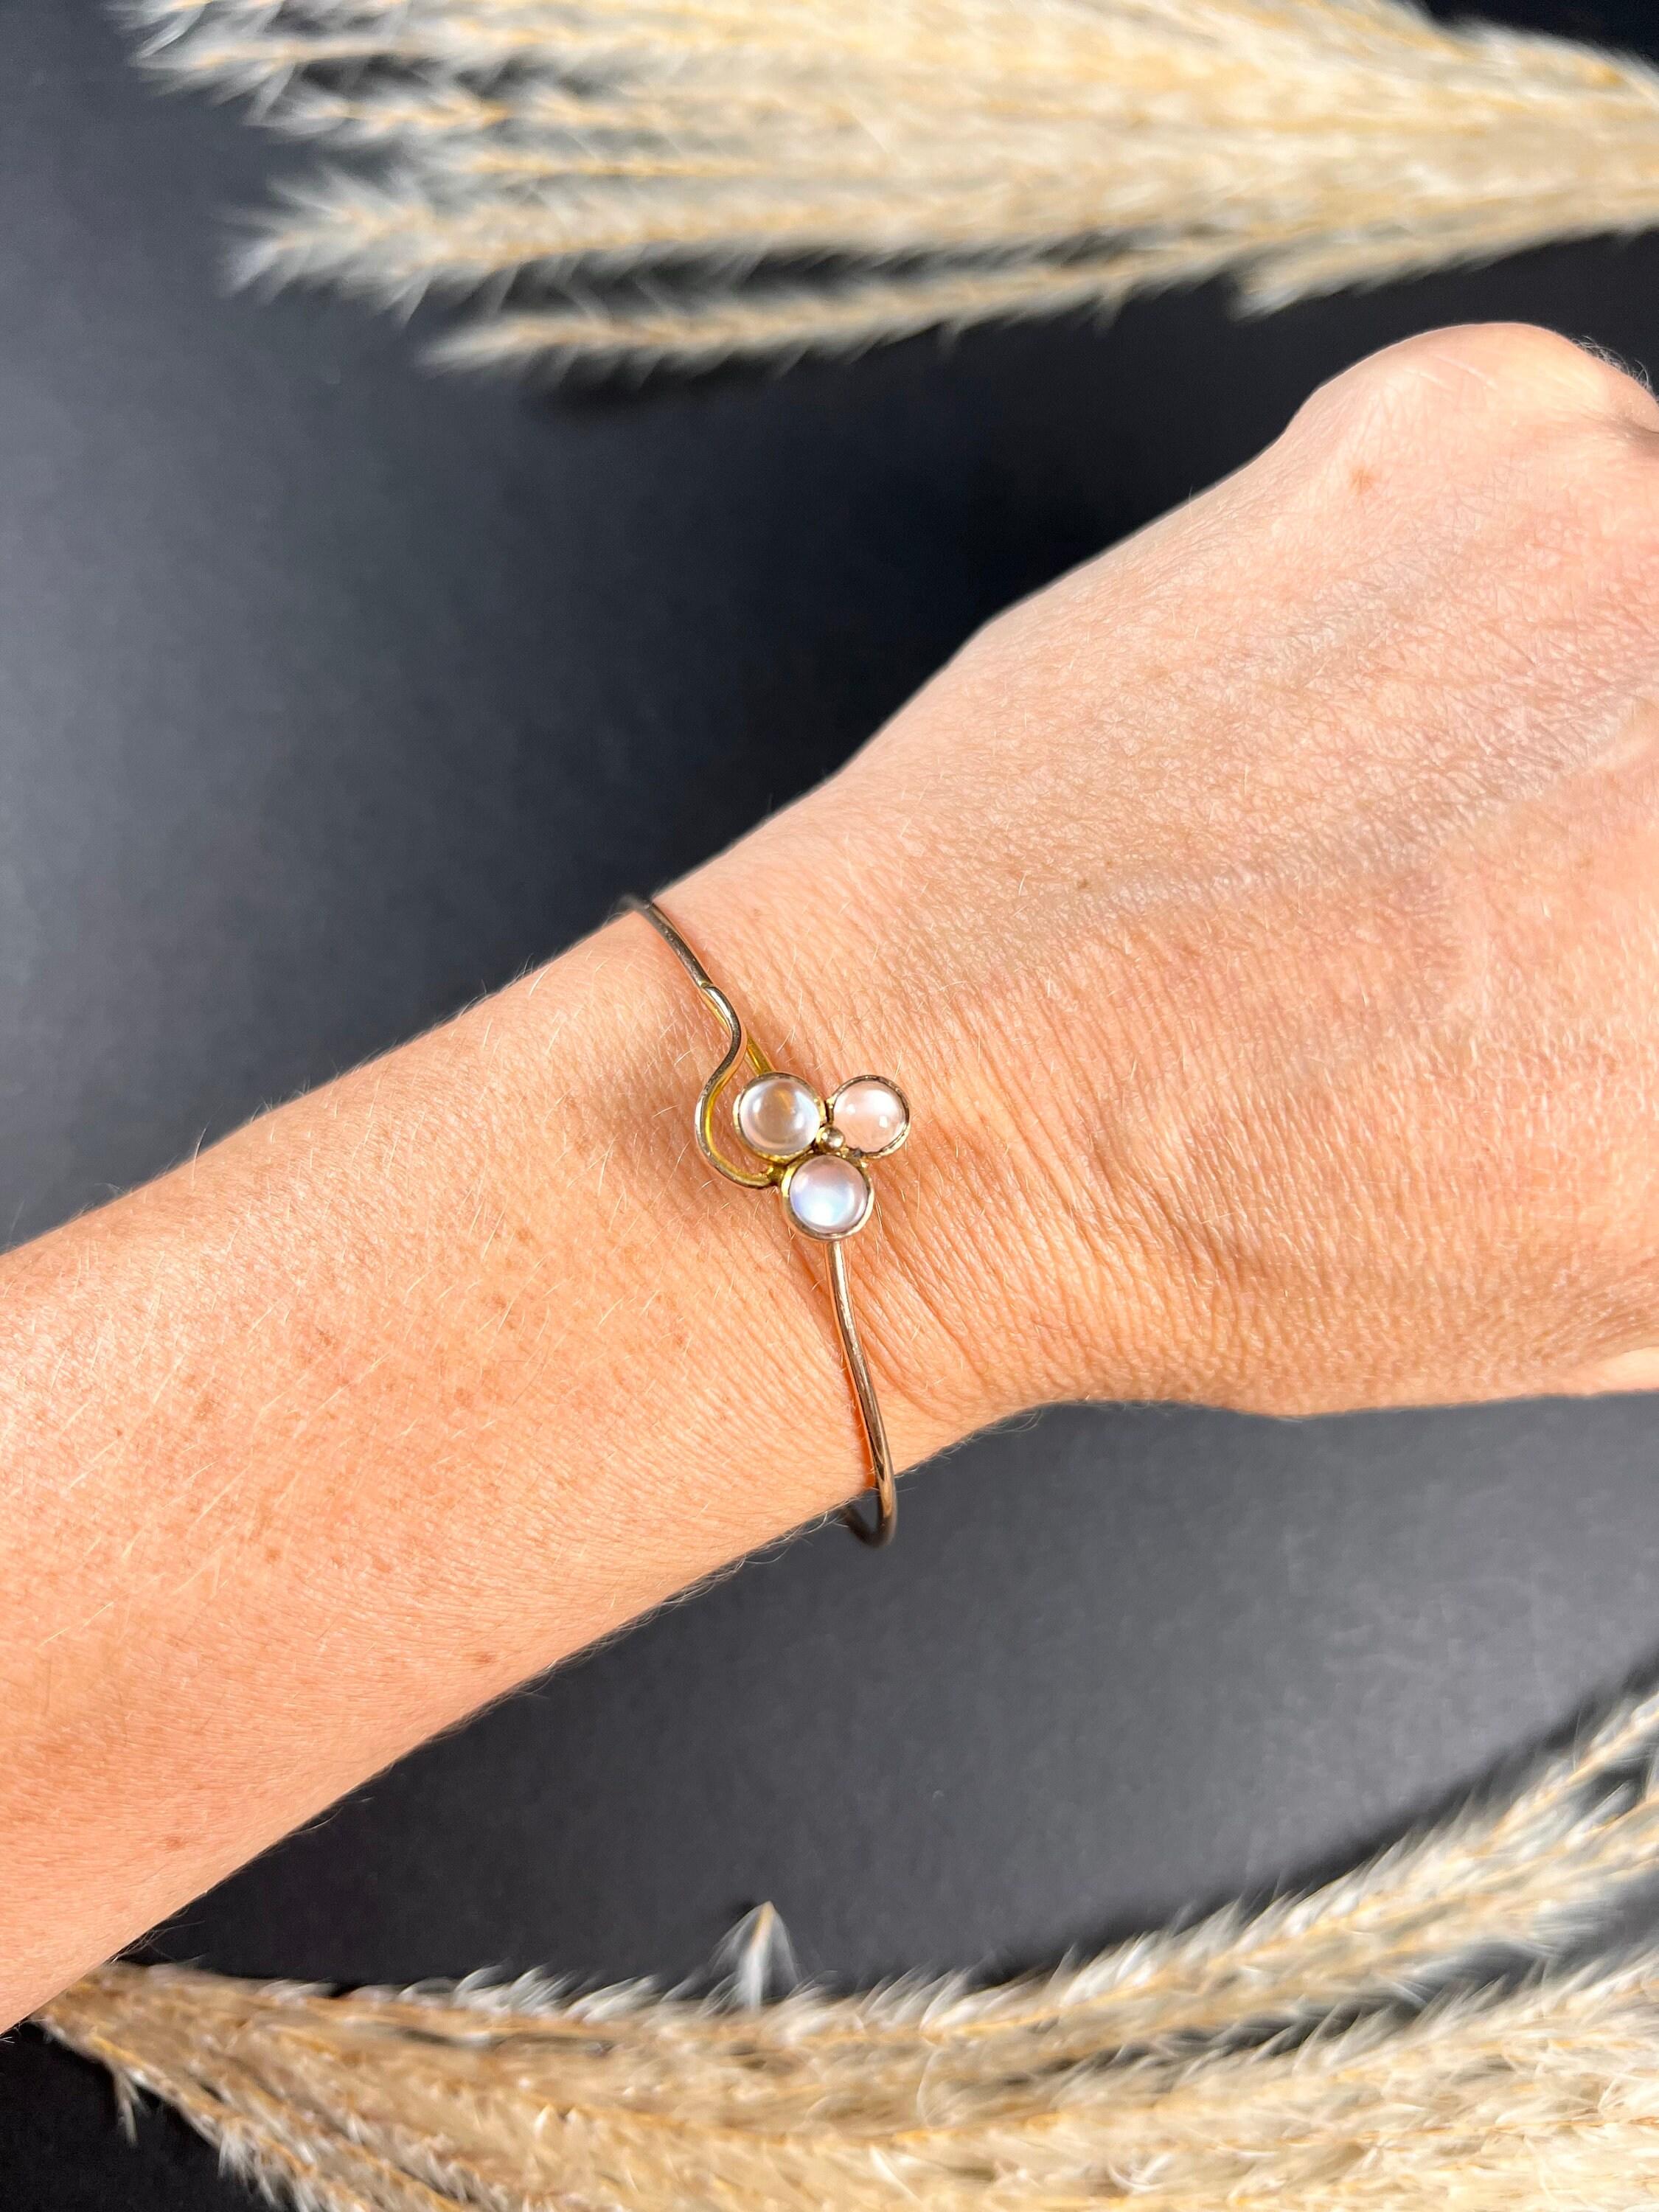 Antique Clover Bangle 

9ct Rose Gold Tested

Circa 1920’s

Beautiful, rose gold, antique gold bangle. Features a pretty three leaf clover. Set with gorgeous, round moonstones. 
Features a secure, hidden clasp which hooks underneath the clover.